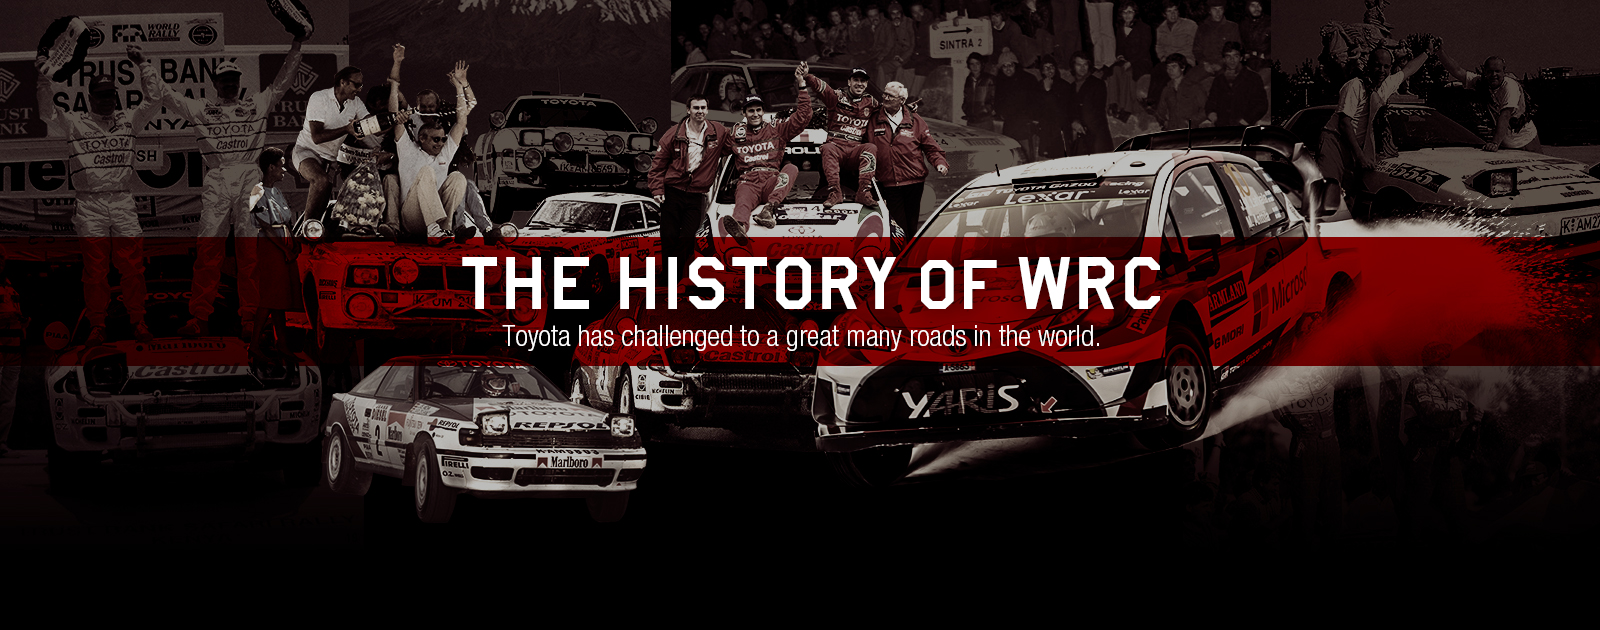 The history of WRC